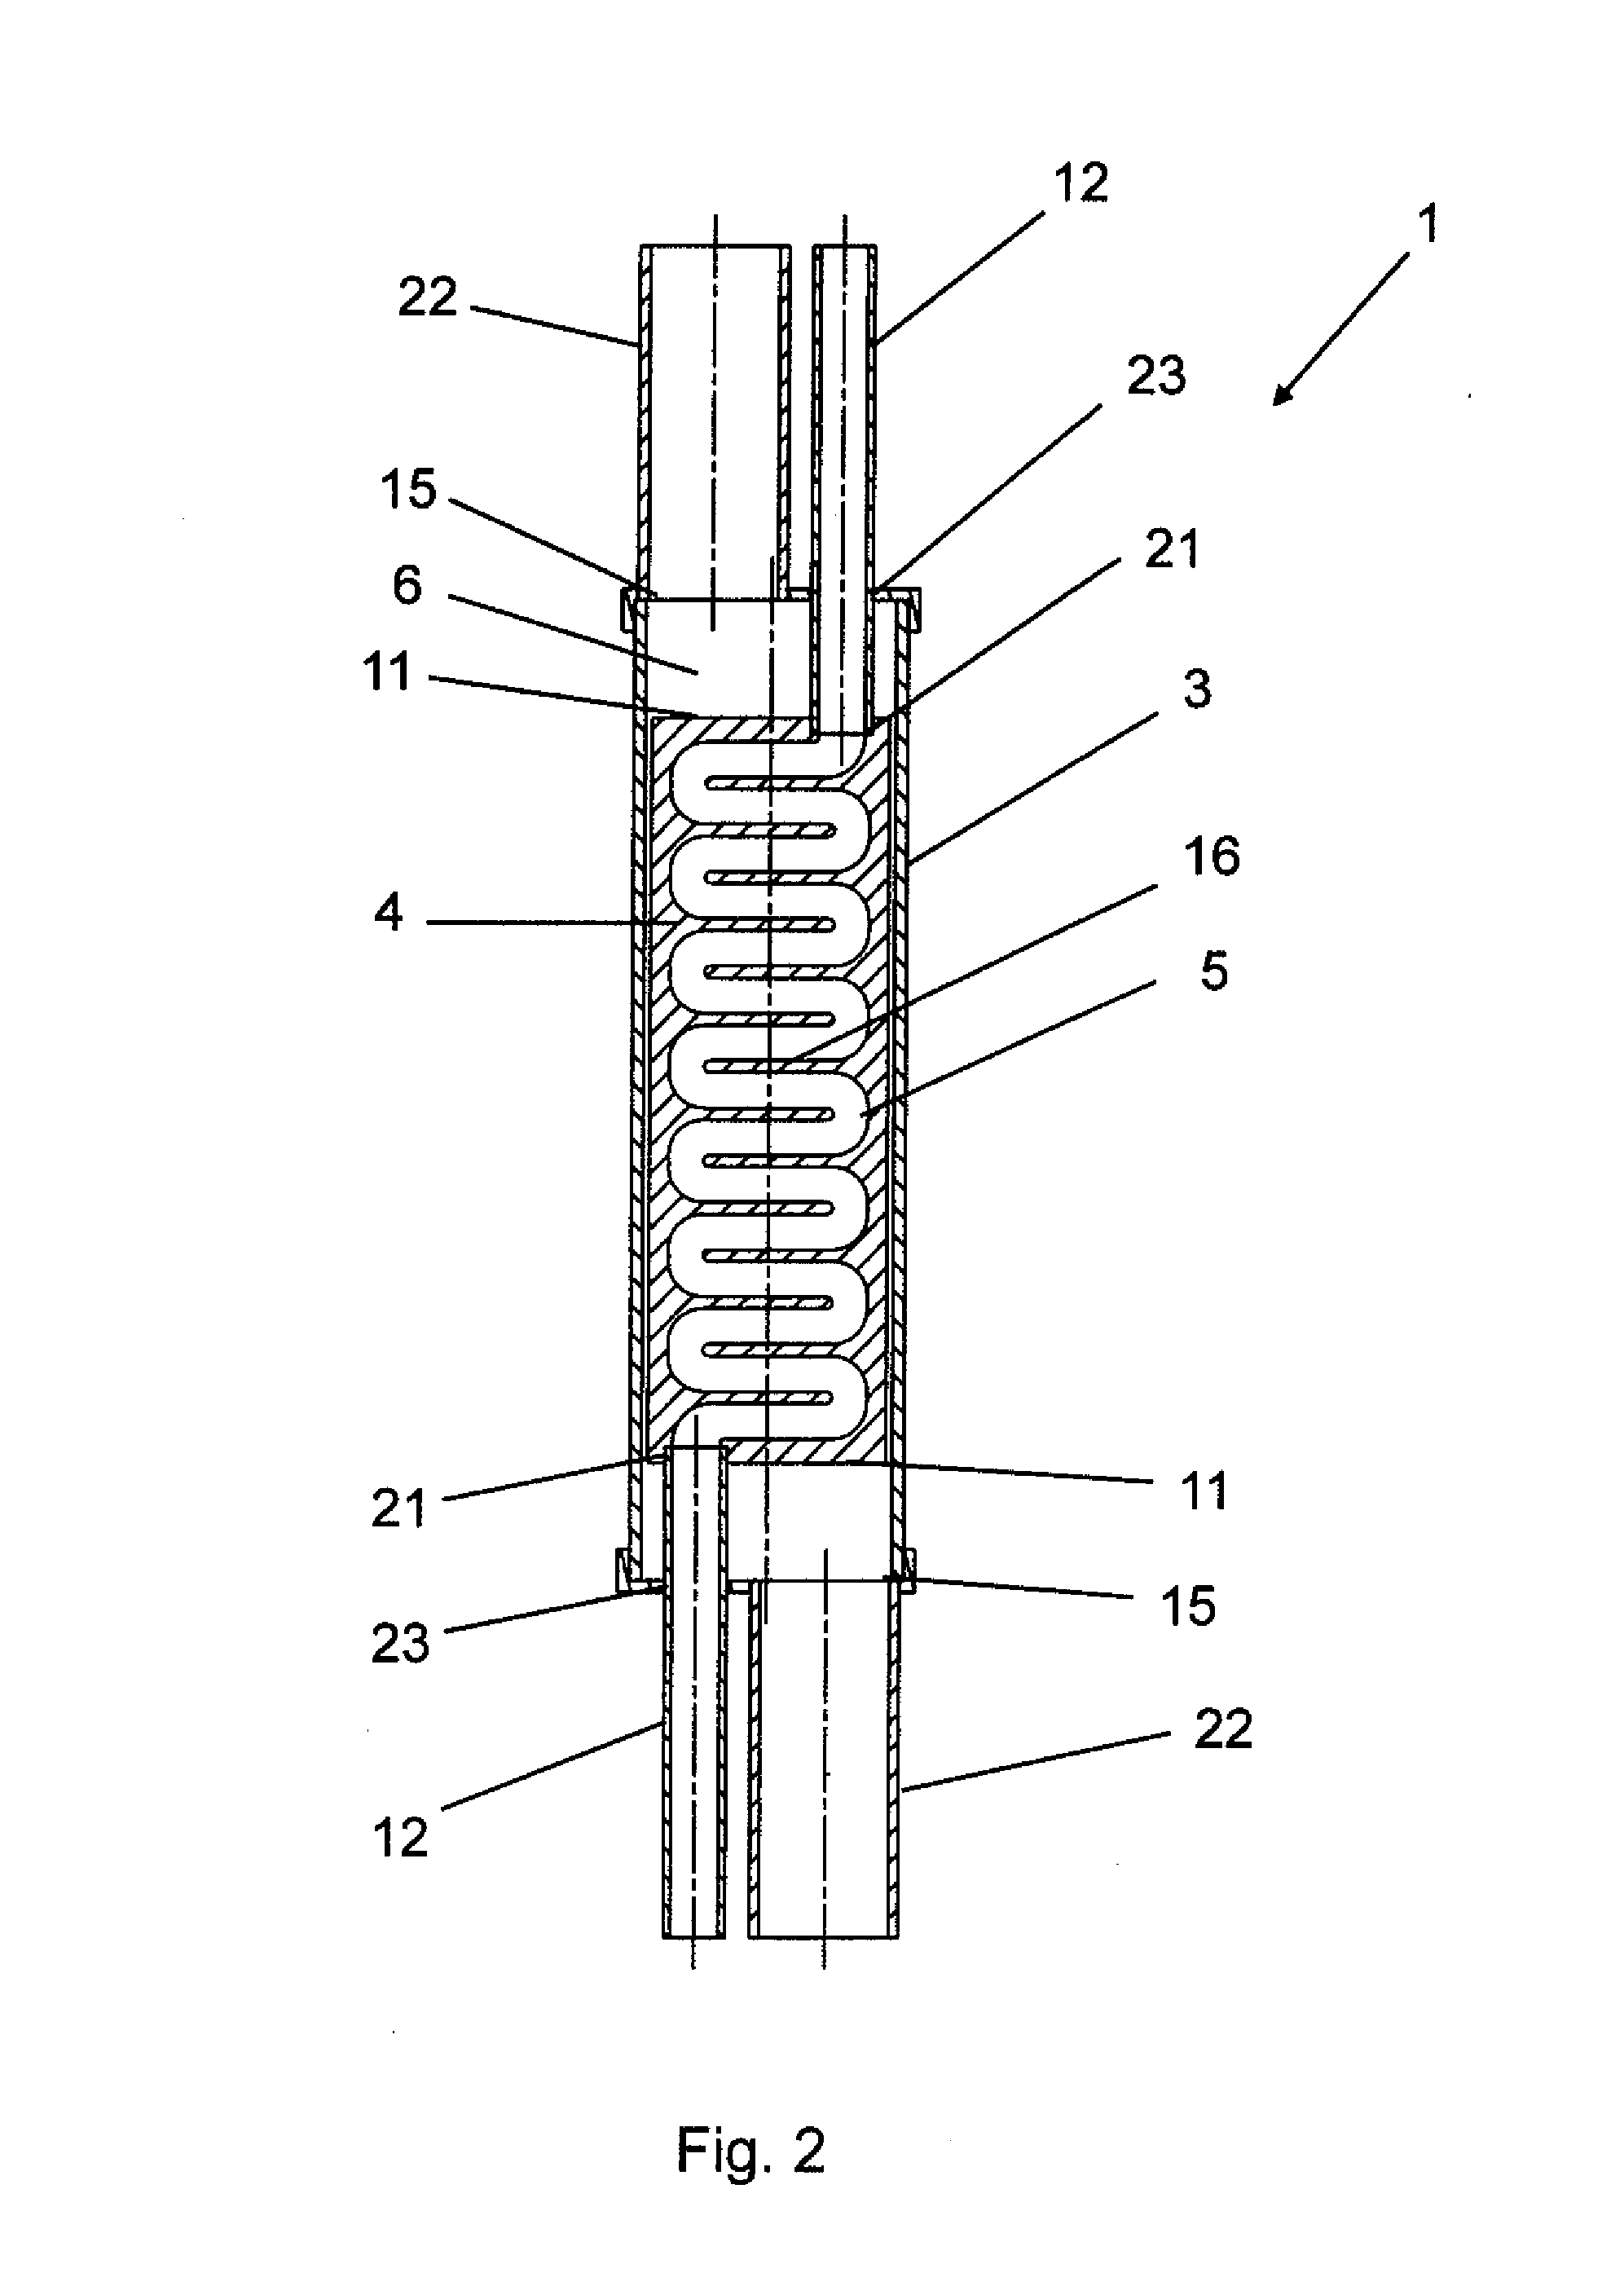 Internal Heat Exchanger for an Air Conditioning System